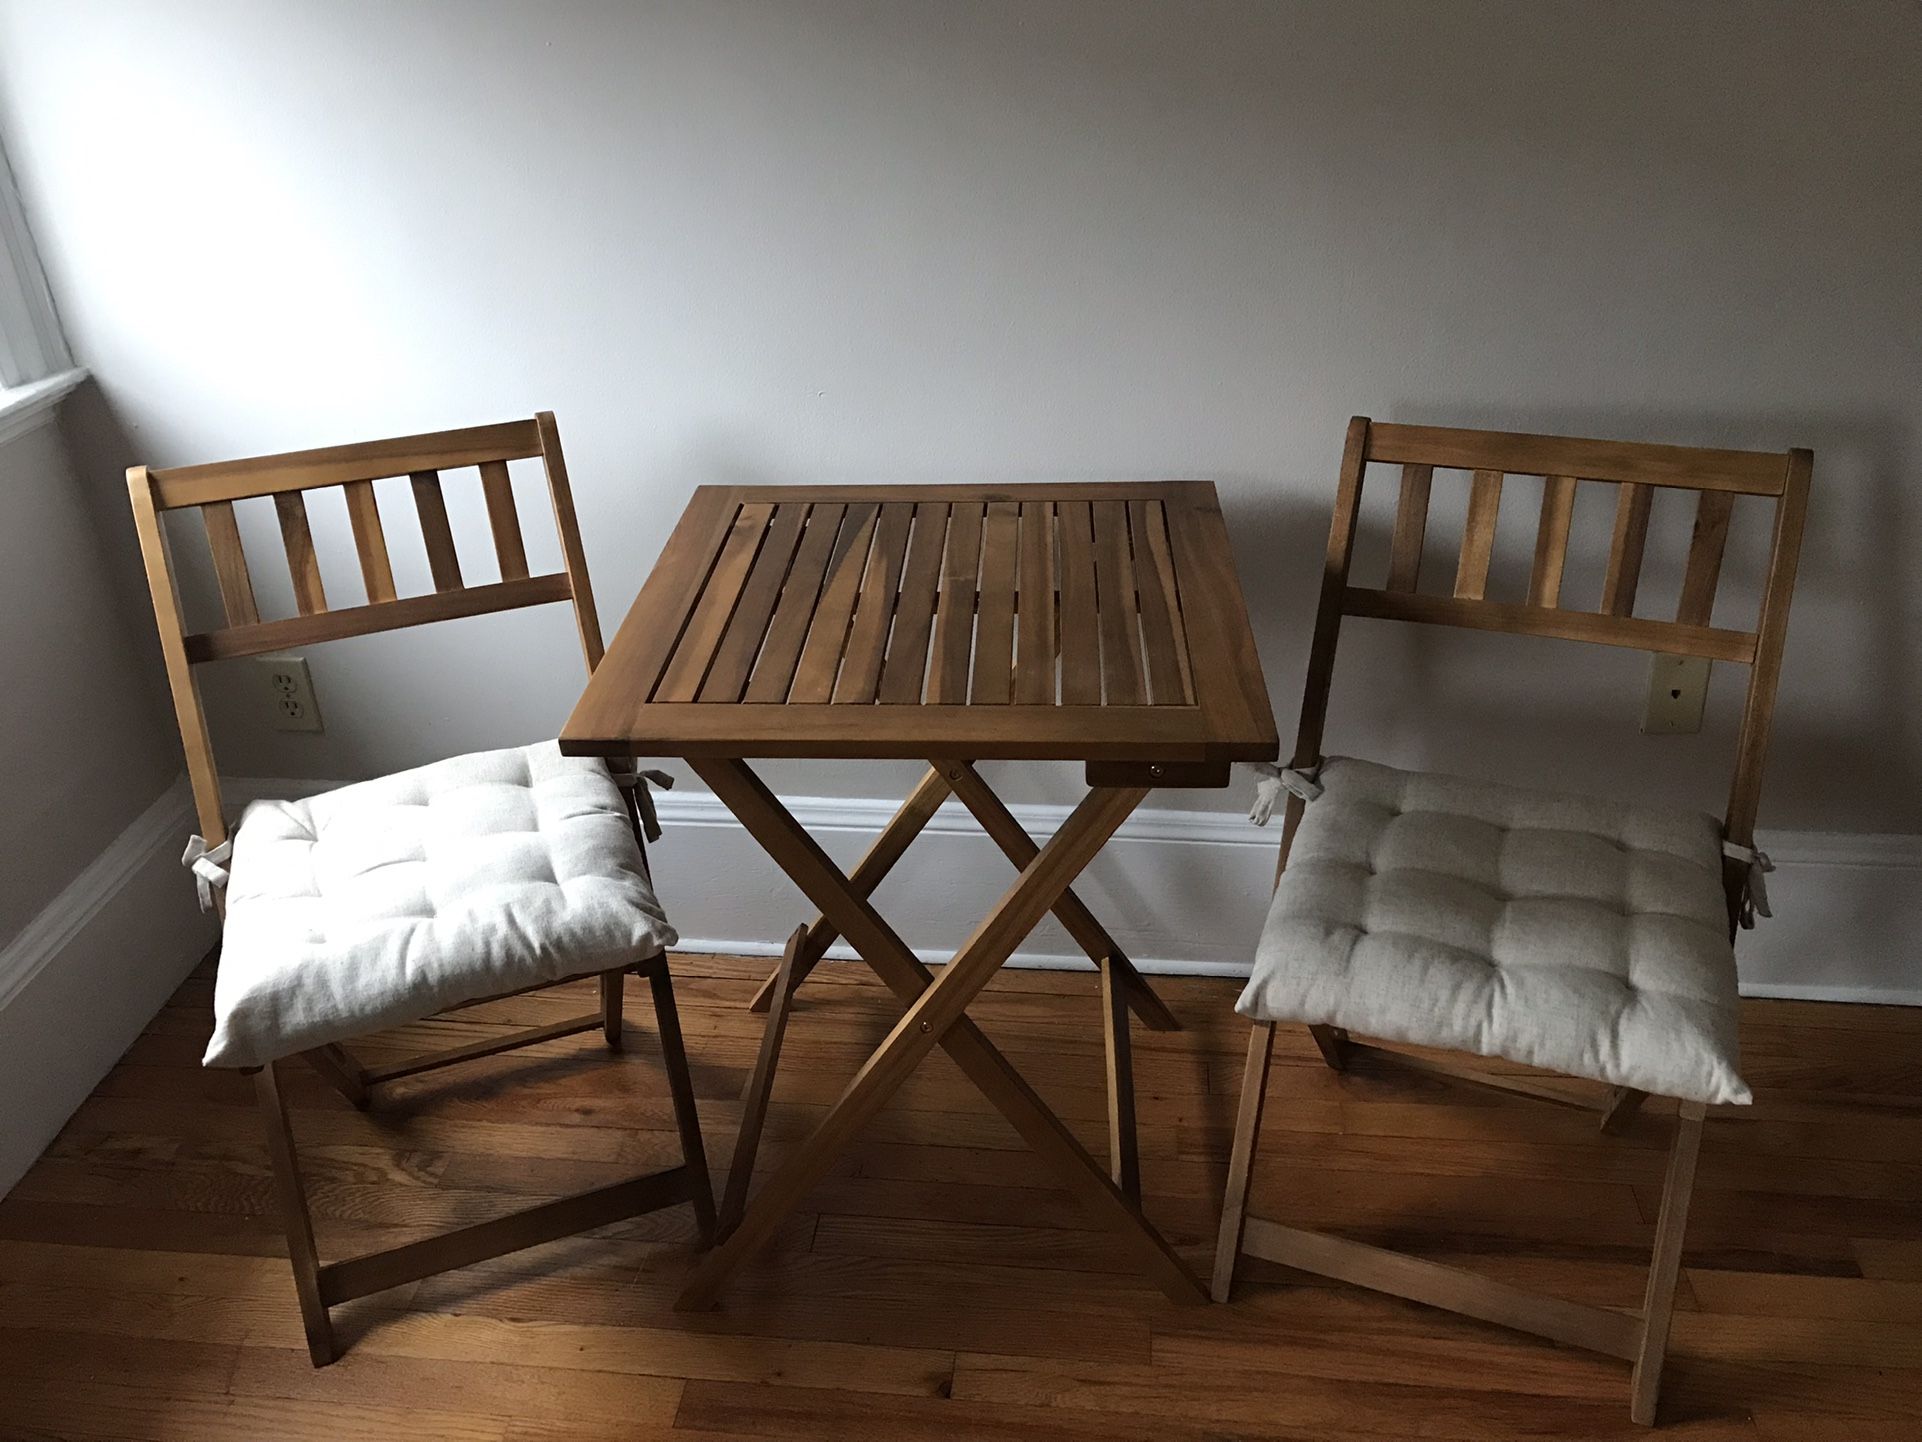 Small Table And Chairs For Sale